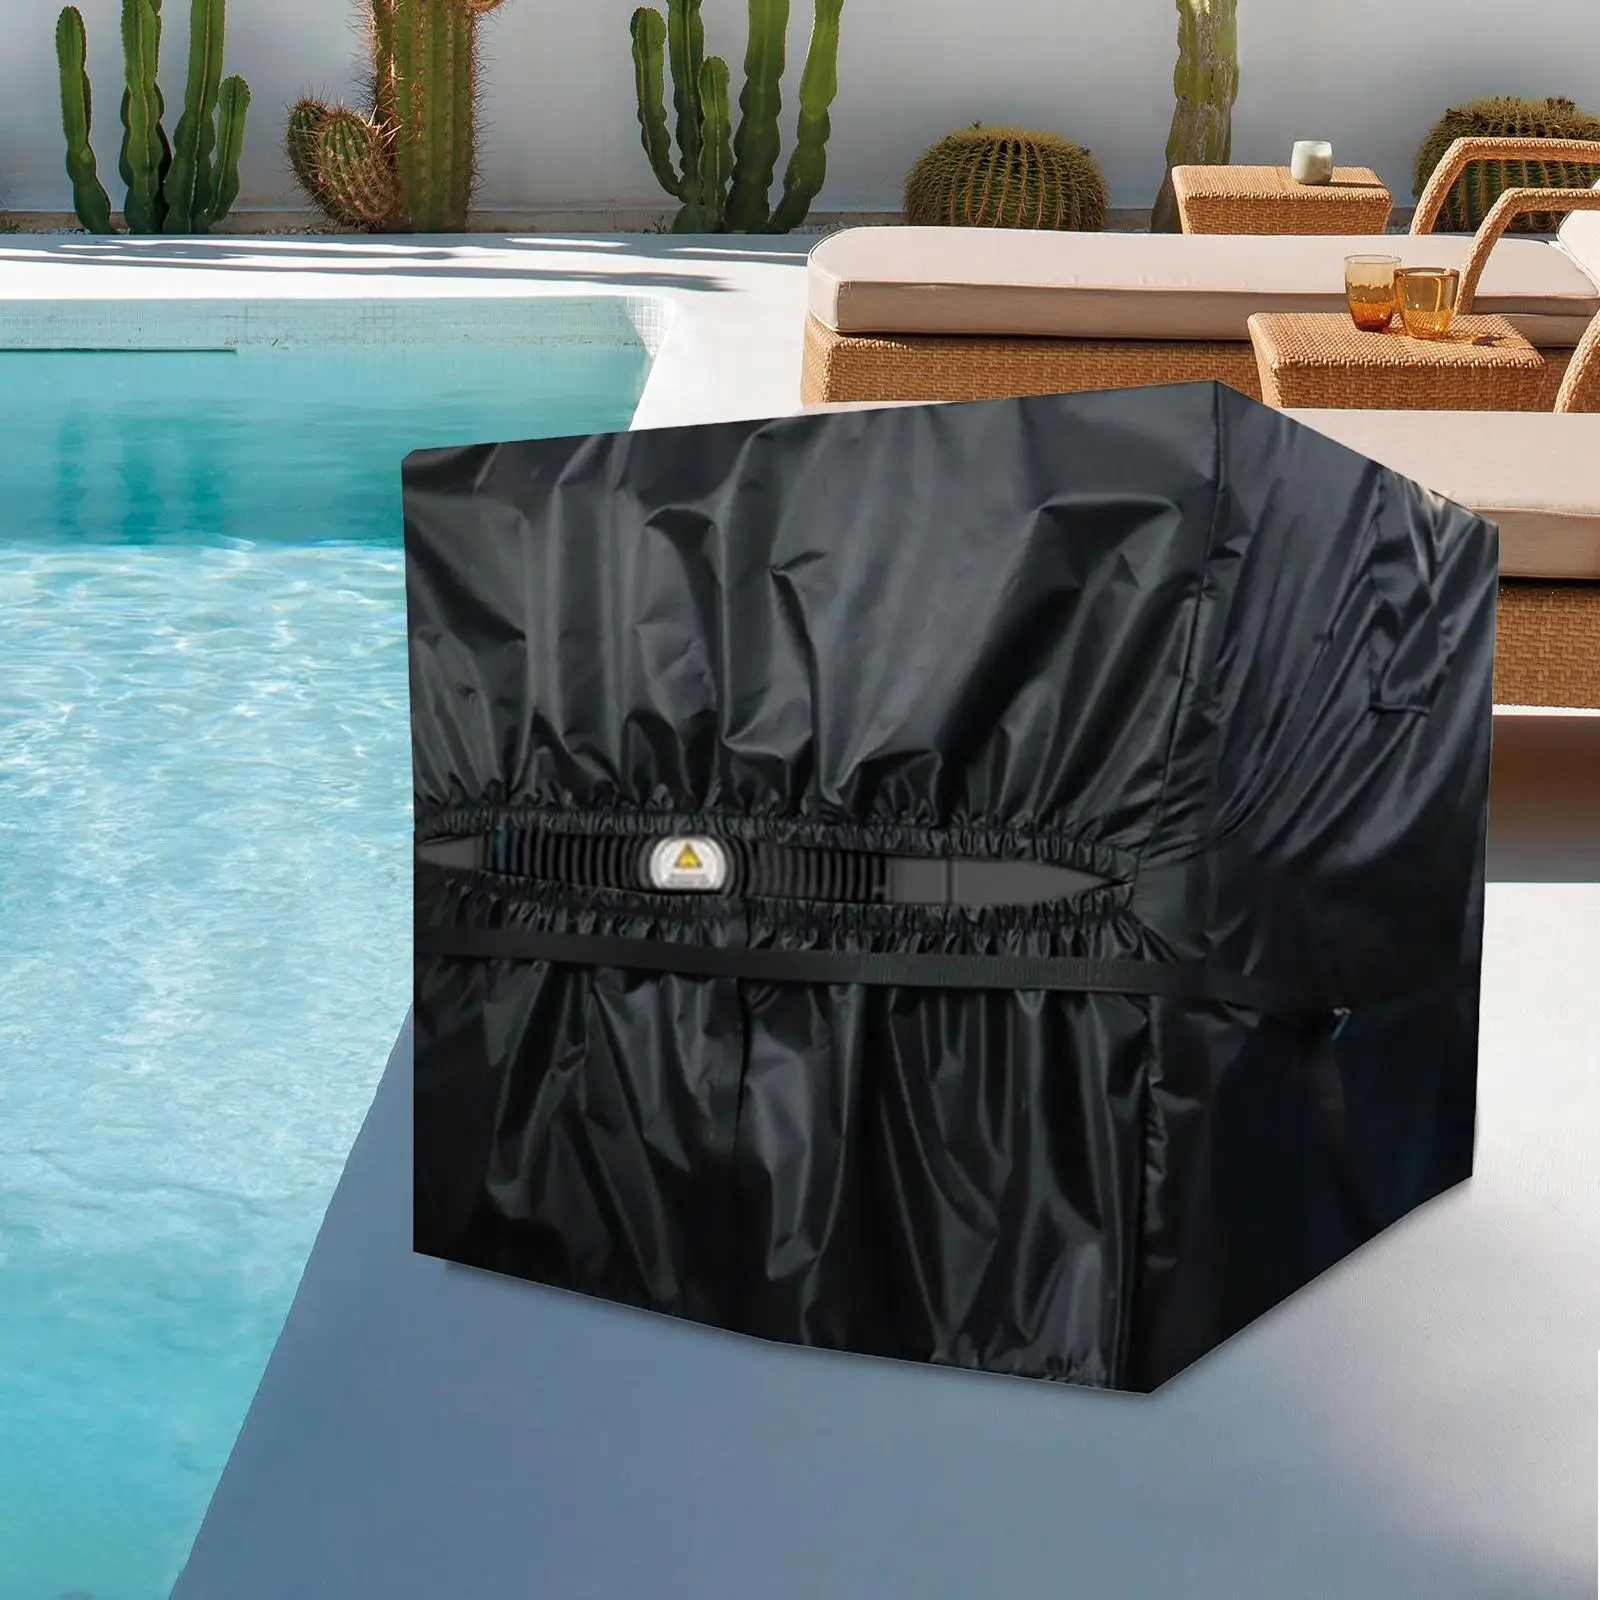 Pool Heater Cover Durable Furniture Covers Shade Dustproof Multifunction Outdoor Protection Pool Heat Pump Cover for Outdoor